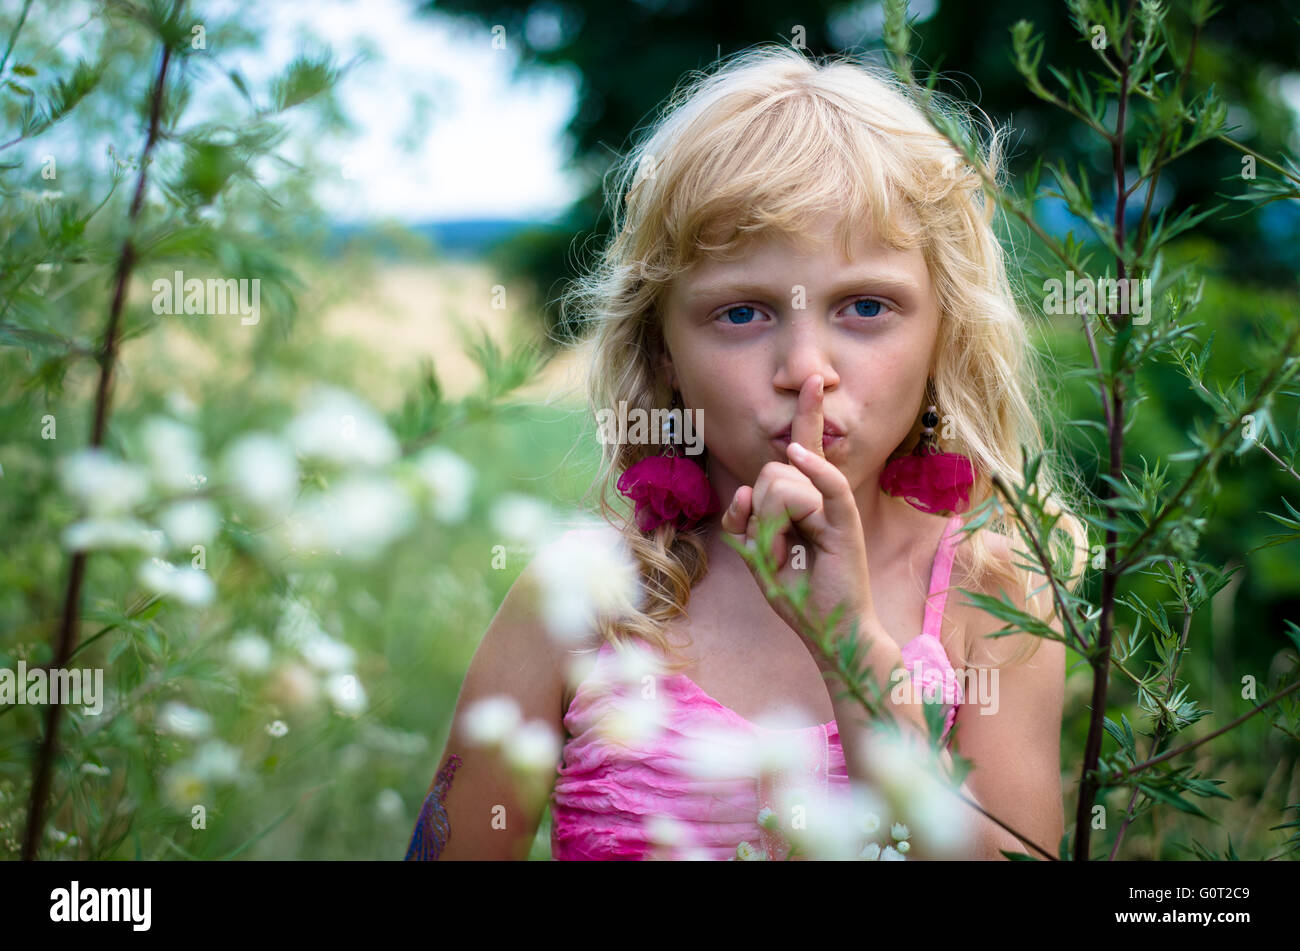 little kid with pst gesture Stock Photo